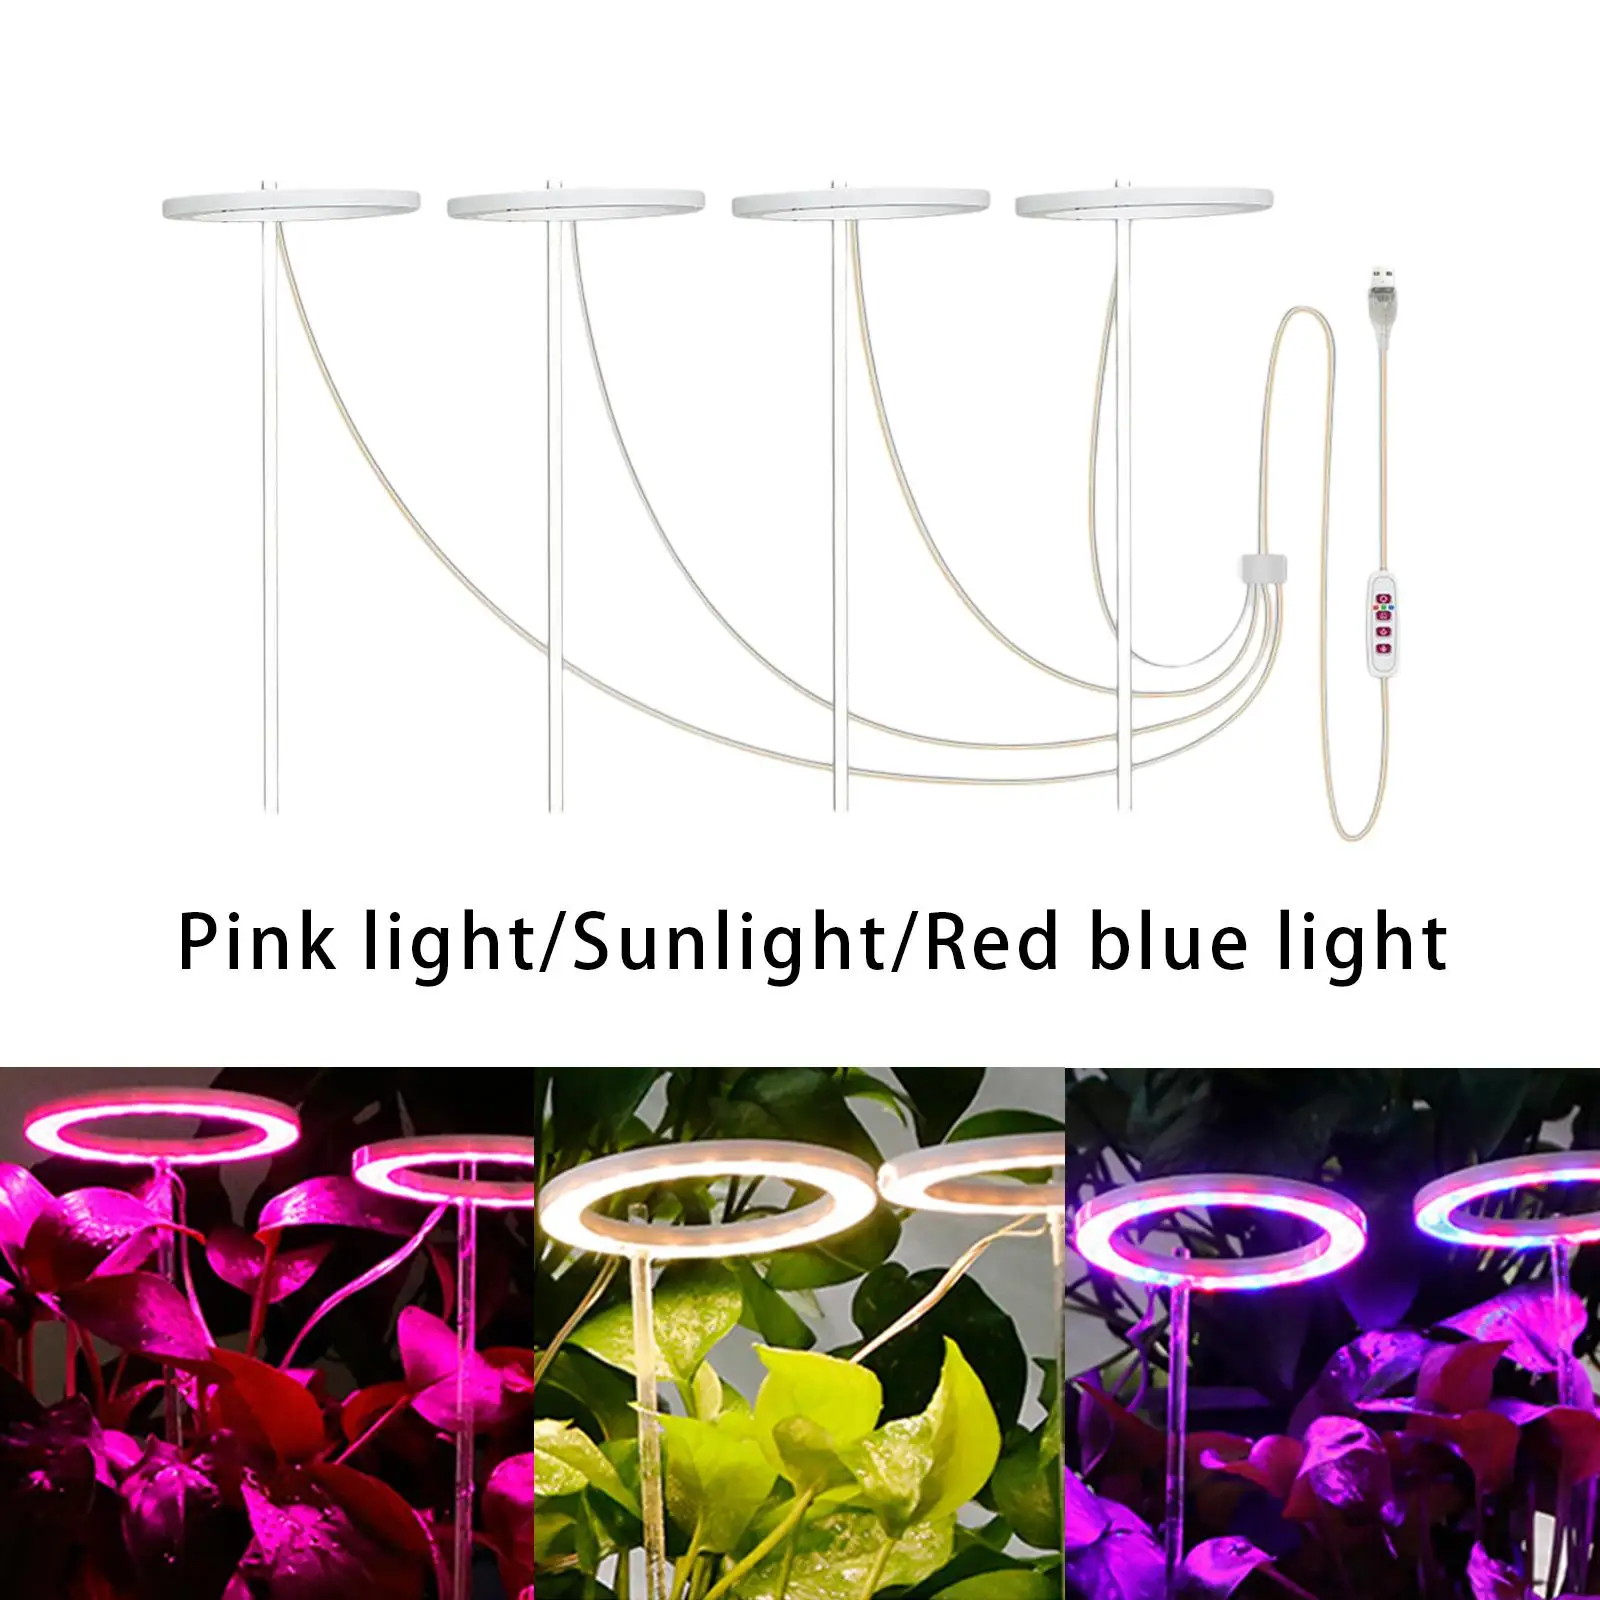 LED Grow Light 4 Lights Auto On Off Timing 8 12 16Hrs Plant Growing Lamp for Indoor